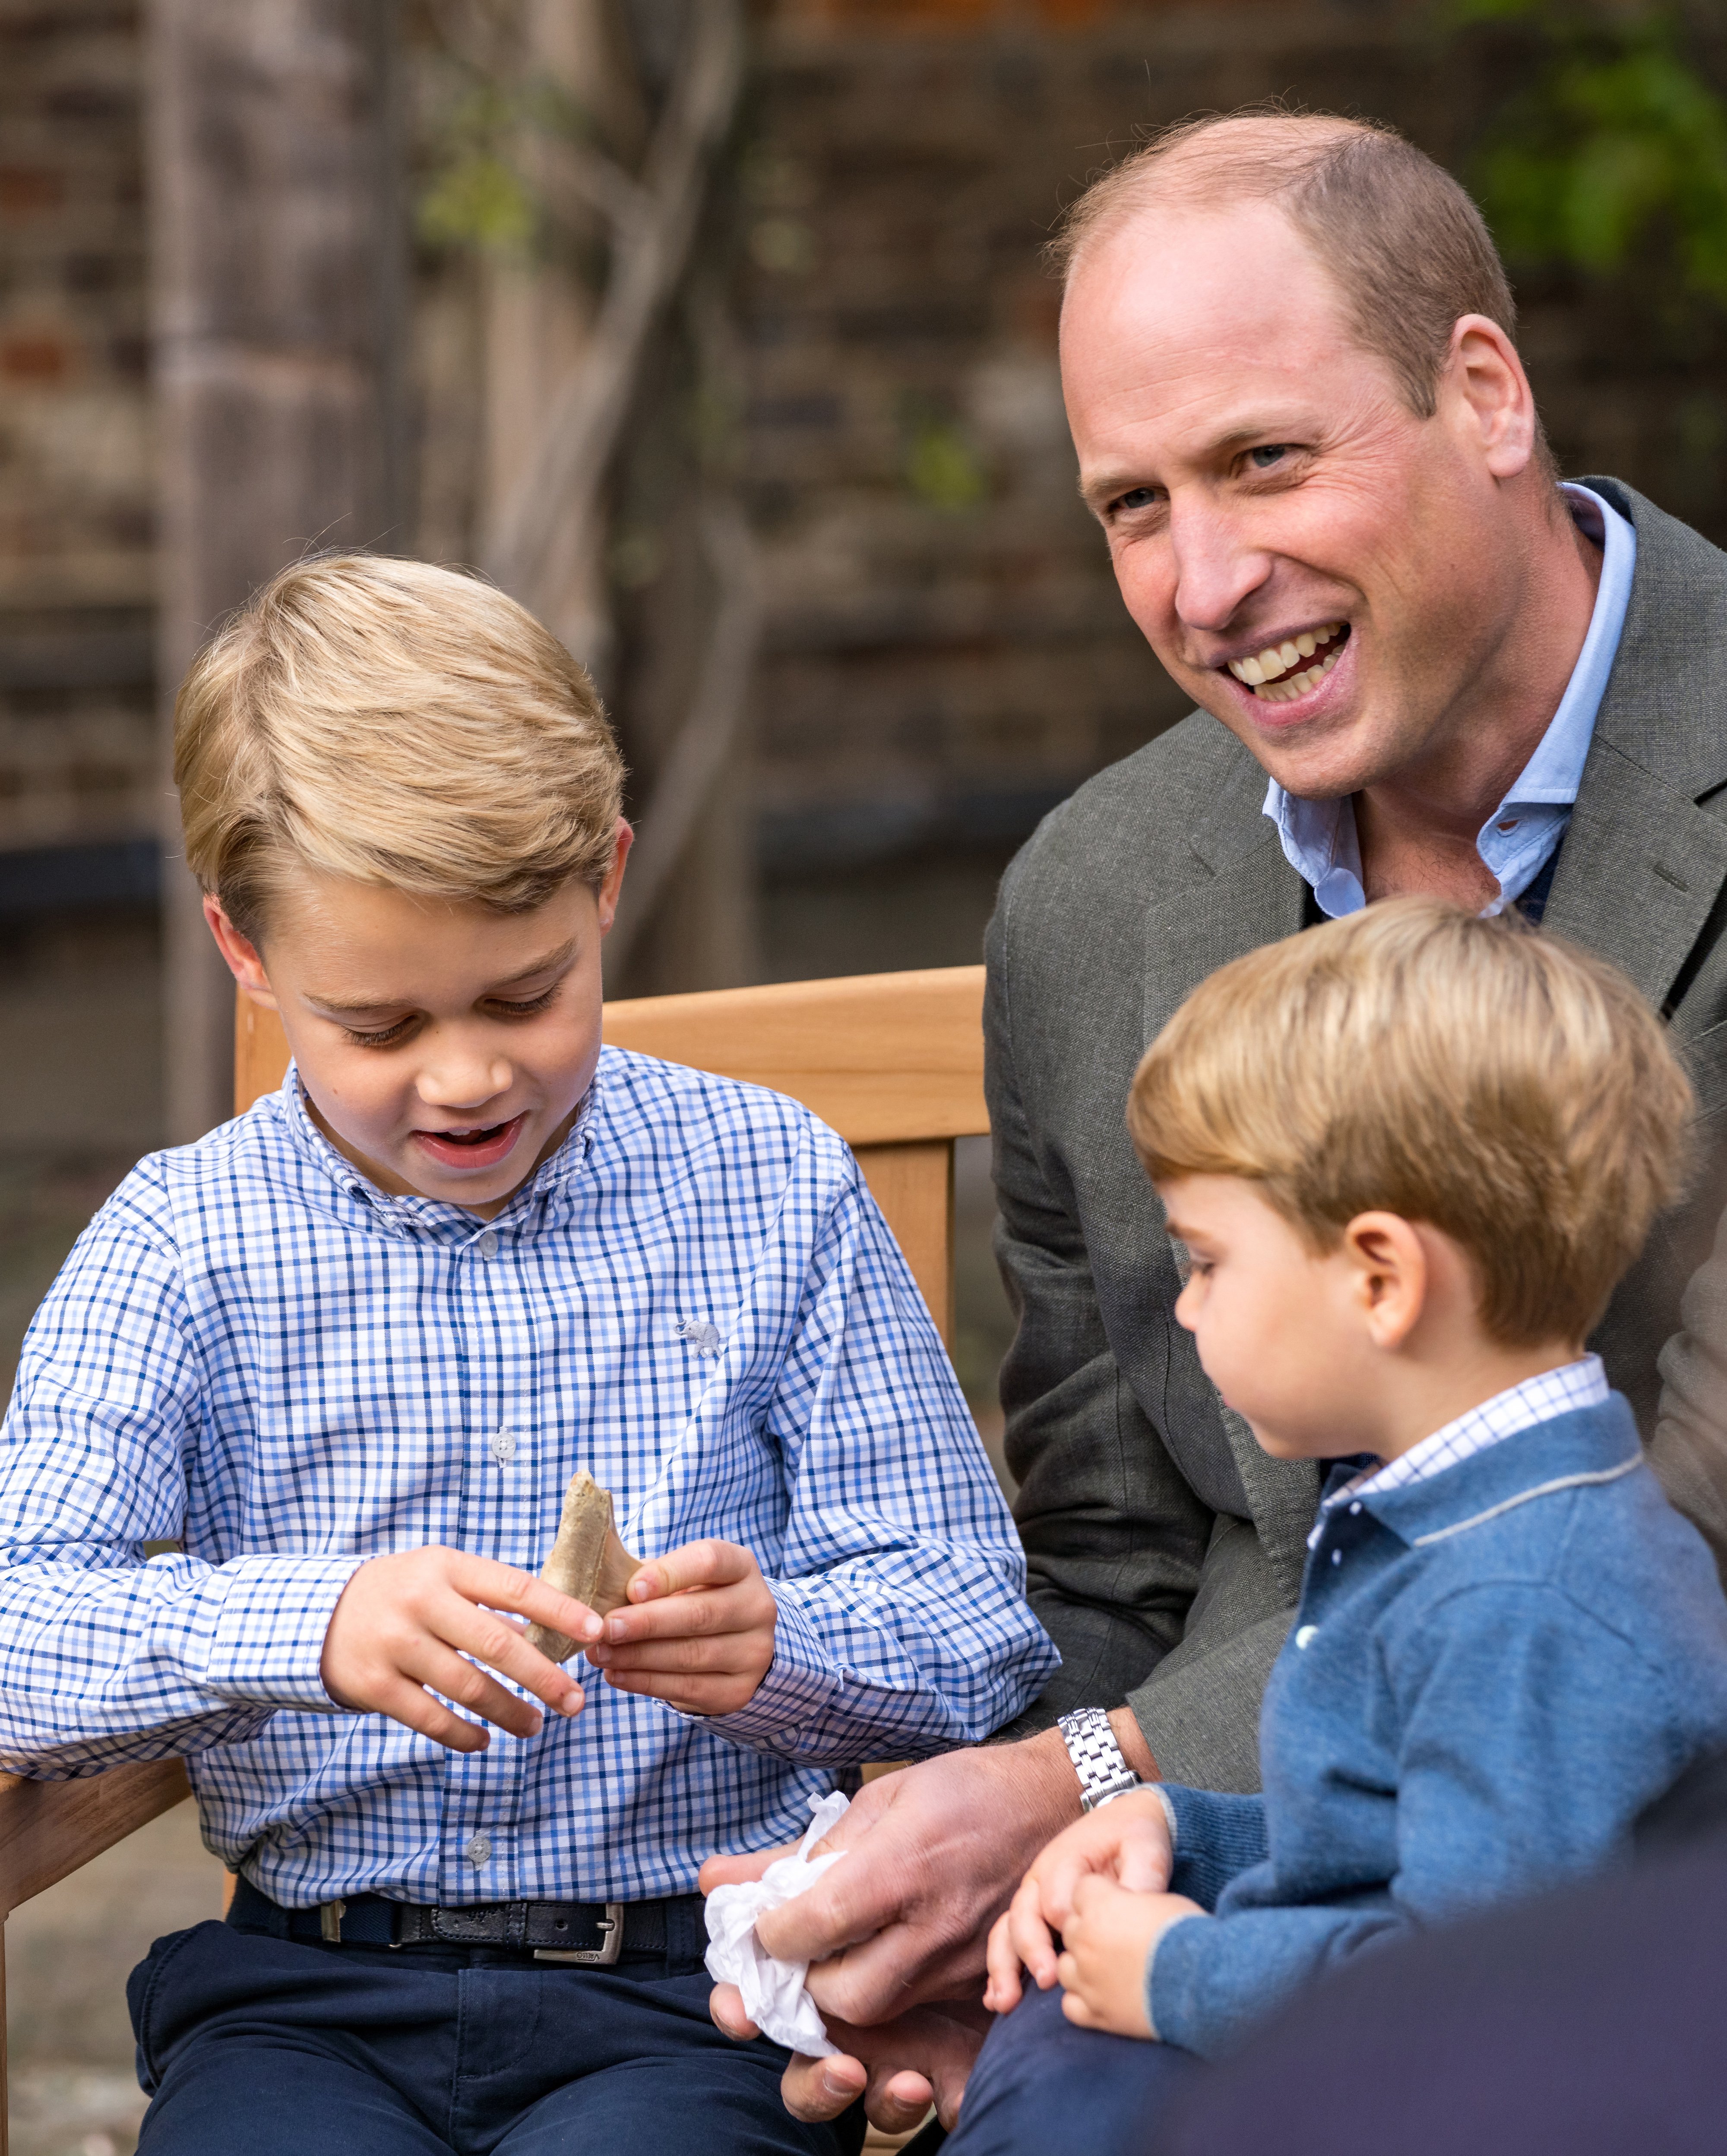 Prince George and Prince William at an outdoor screening of David Attenborough's "A Life On Our Planet" in London, England on September 24, 2020 | Photo: Getty Images